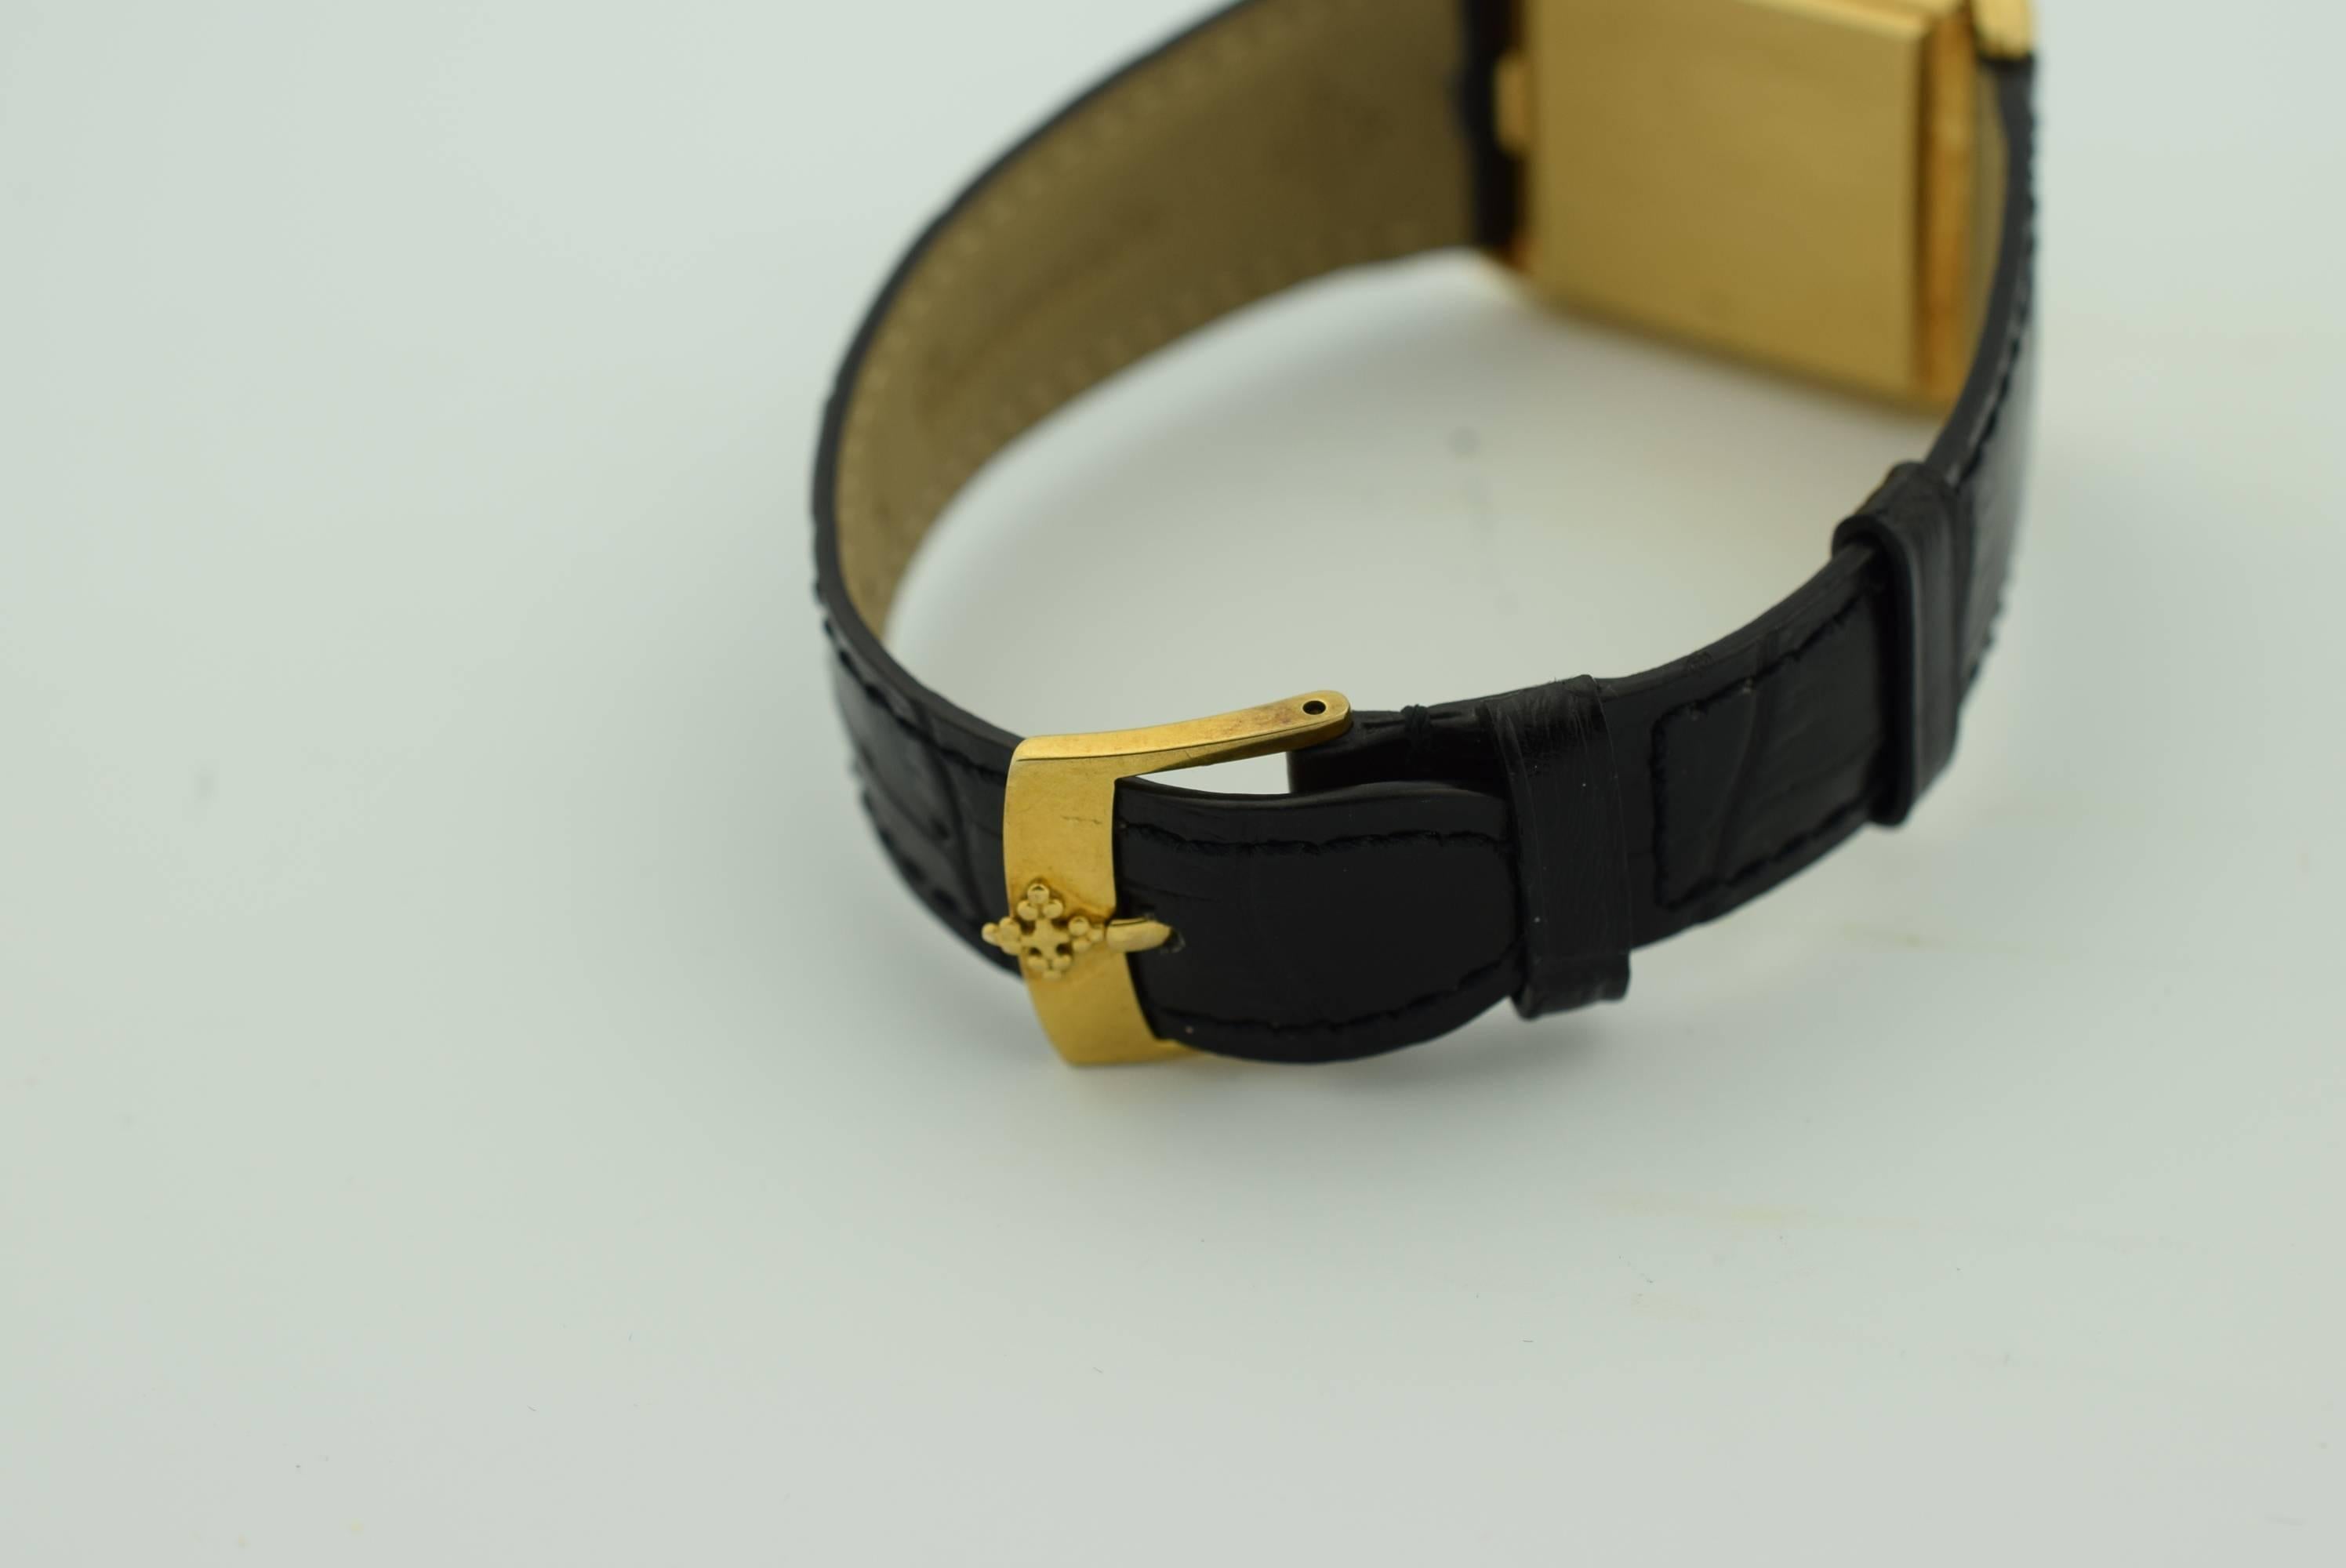 Patek Philippe 18 K Yellow gold with Black Onyx Dial .Model 3649.
Manual wind .Step down Case .36 mm x 30mm case dimensions.
Excellent condition .Rectangular .Patek Philippe Crocodile black band with 18 kyg generic buckle .Warranted for one year